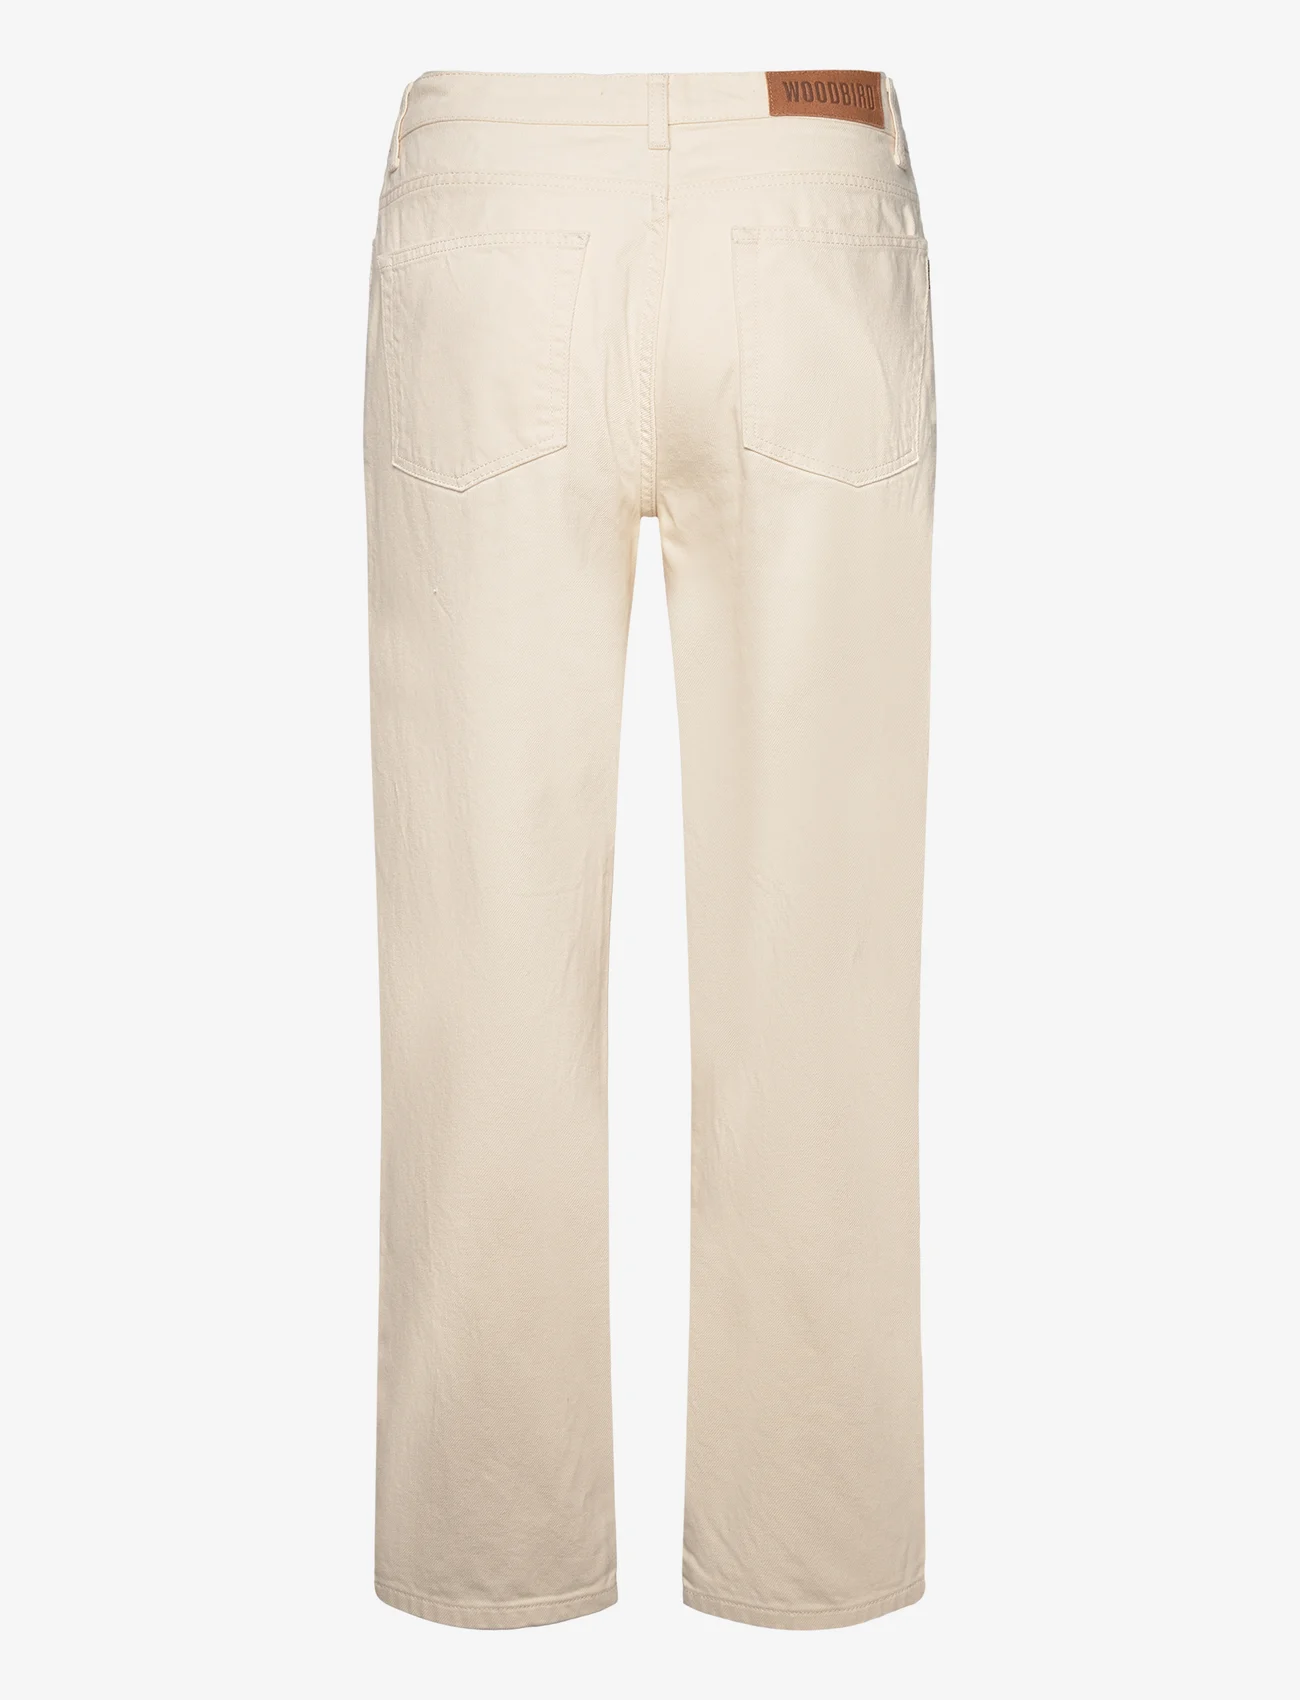 Woodbird - WBLeroy Twill Pants - nordisk style - off white - 1